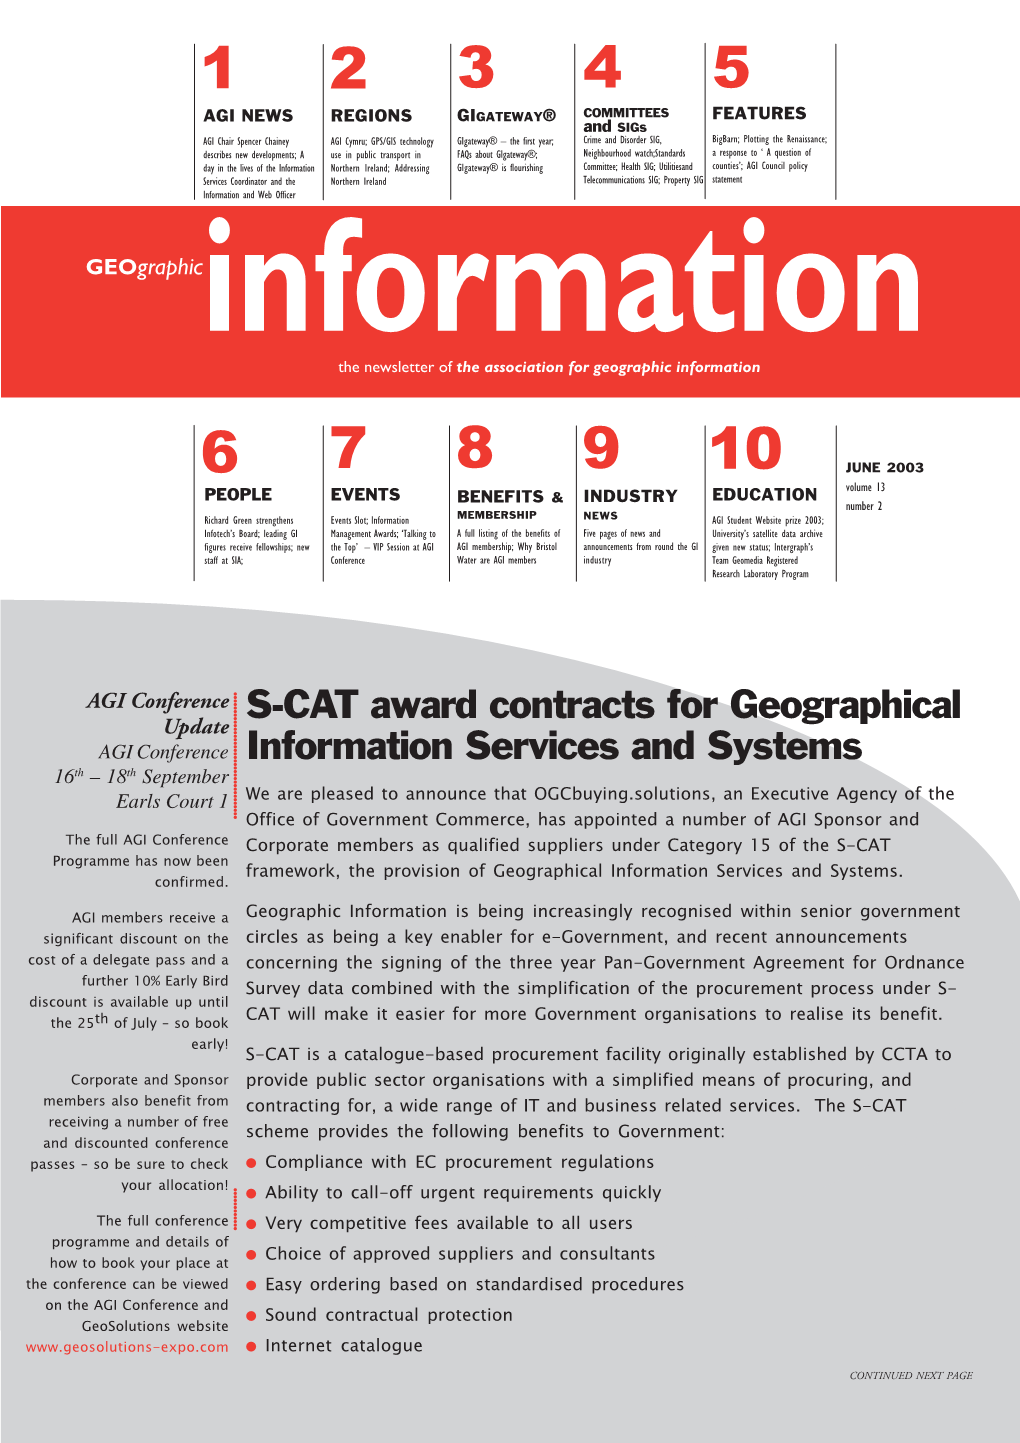 S-CAT Award Contracts for Geographical Information Services and Systems